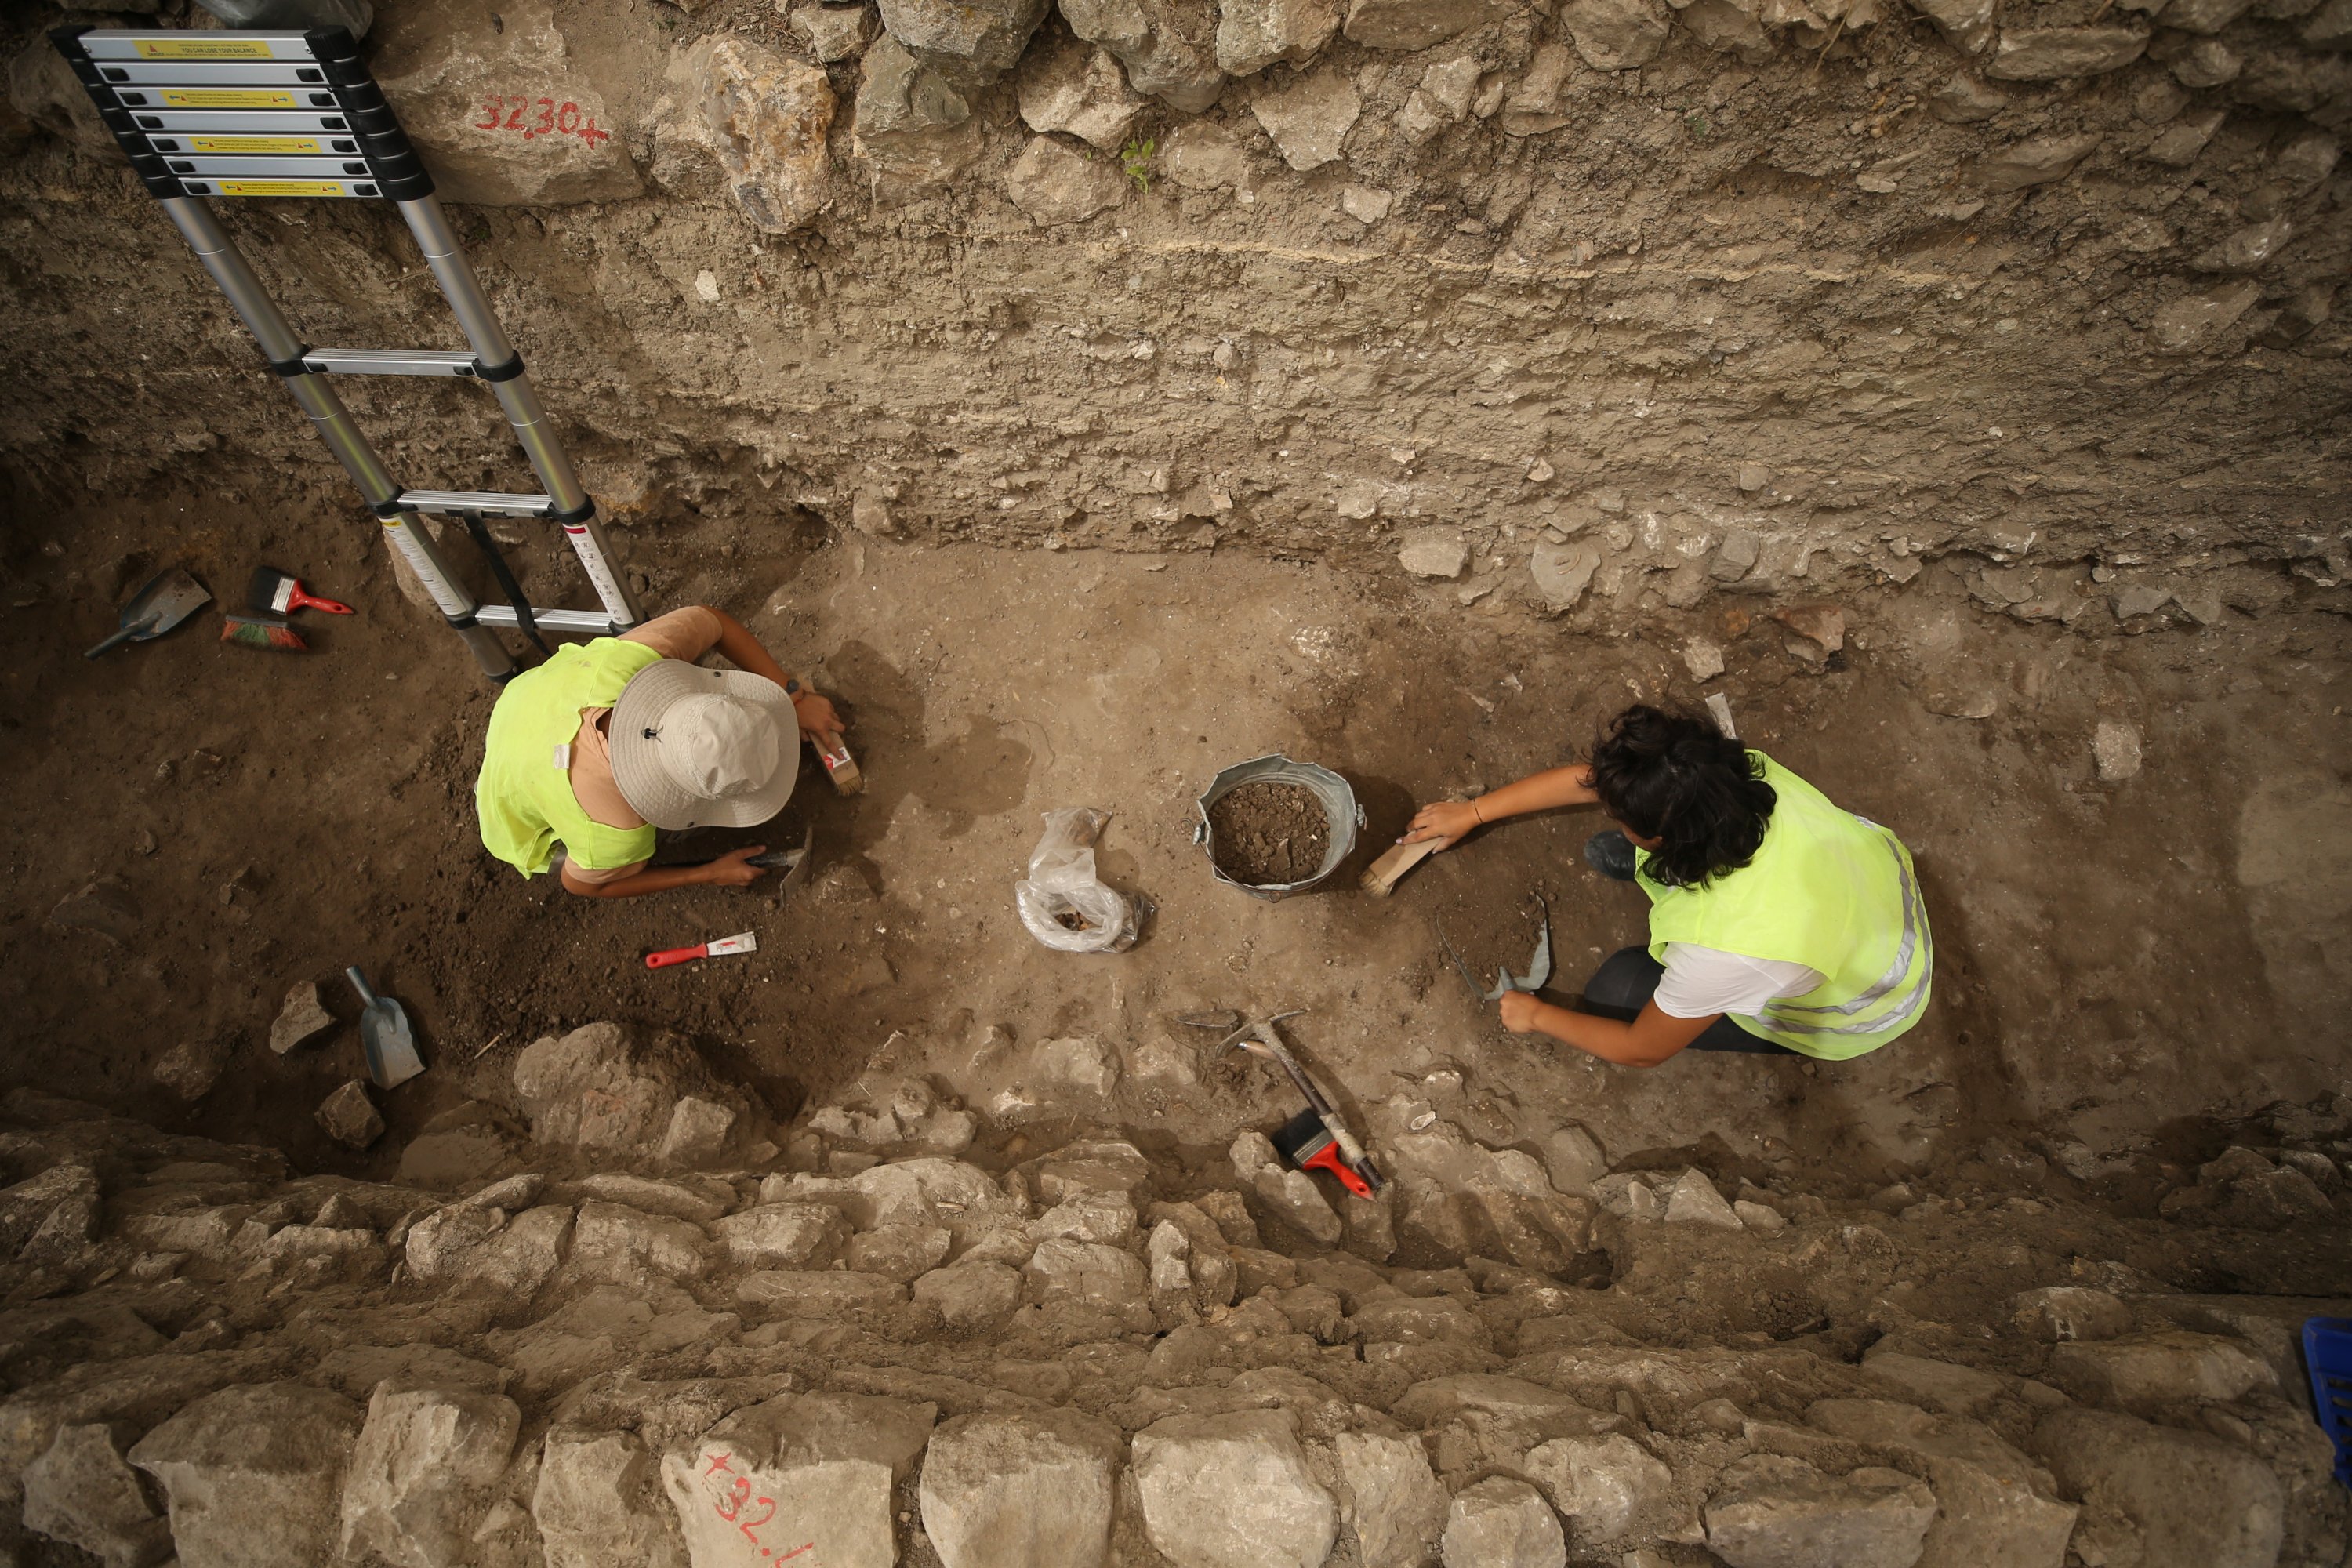 Archaeologists work in the 2,600-year-old kitchen structure in the ancient city of Daskyleion, Balıkesir, western Turkey, Aug. 17, 2021. (AA Photo)